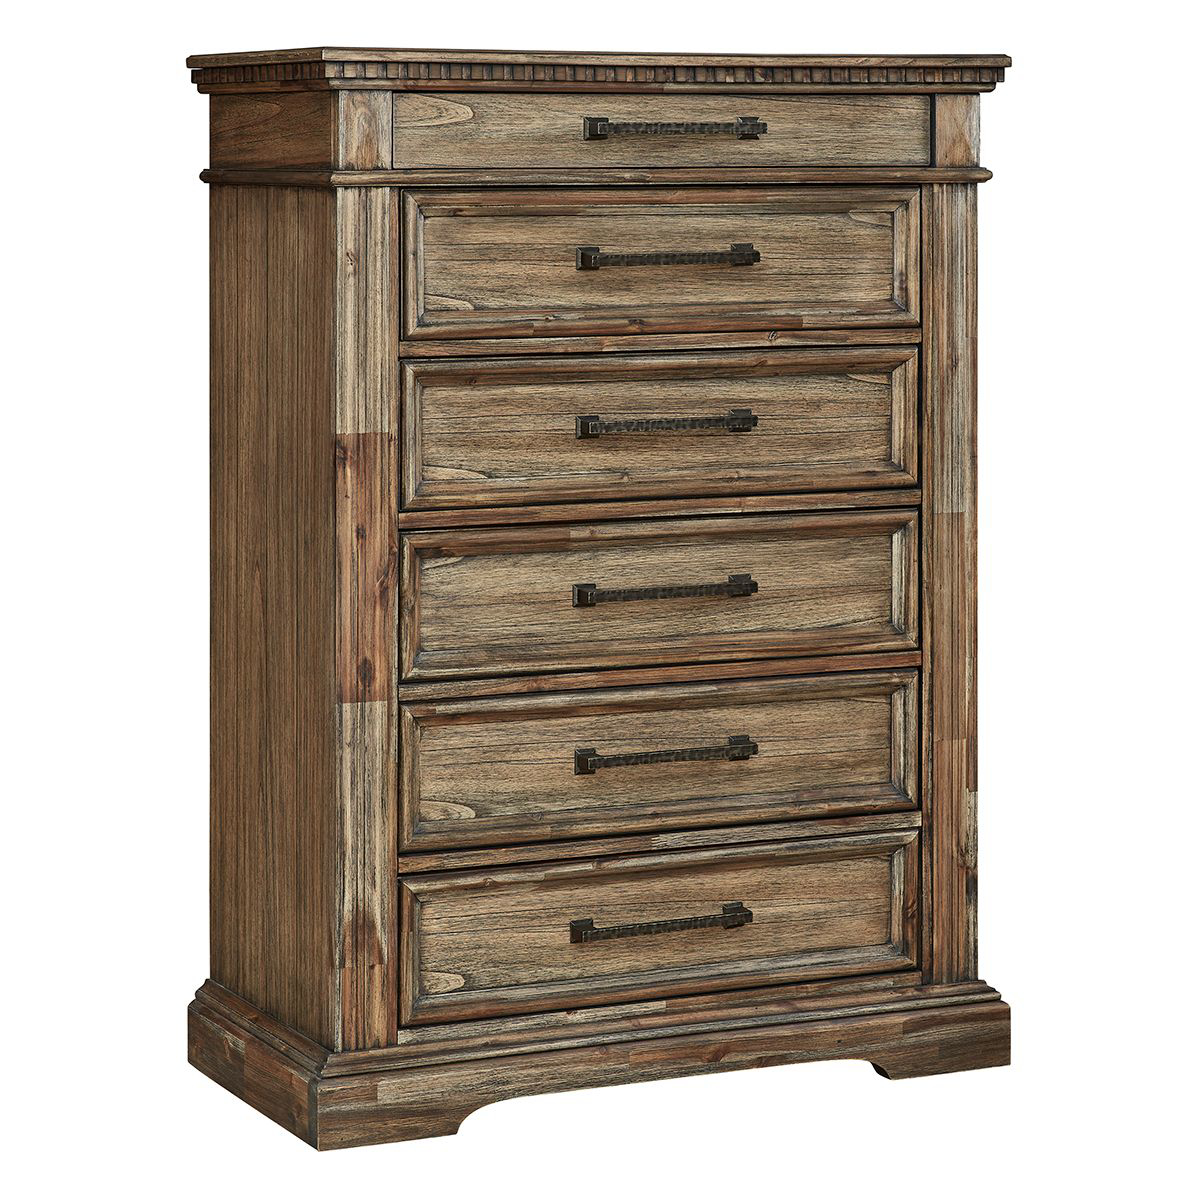 Picture of CORTE MADERA CHEST